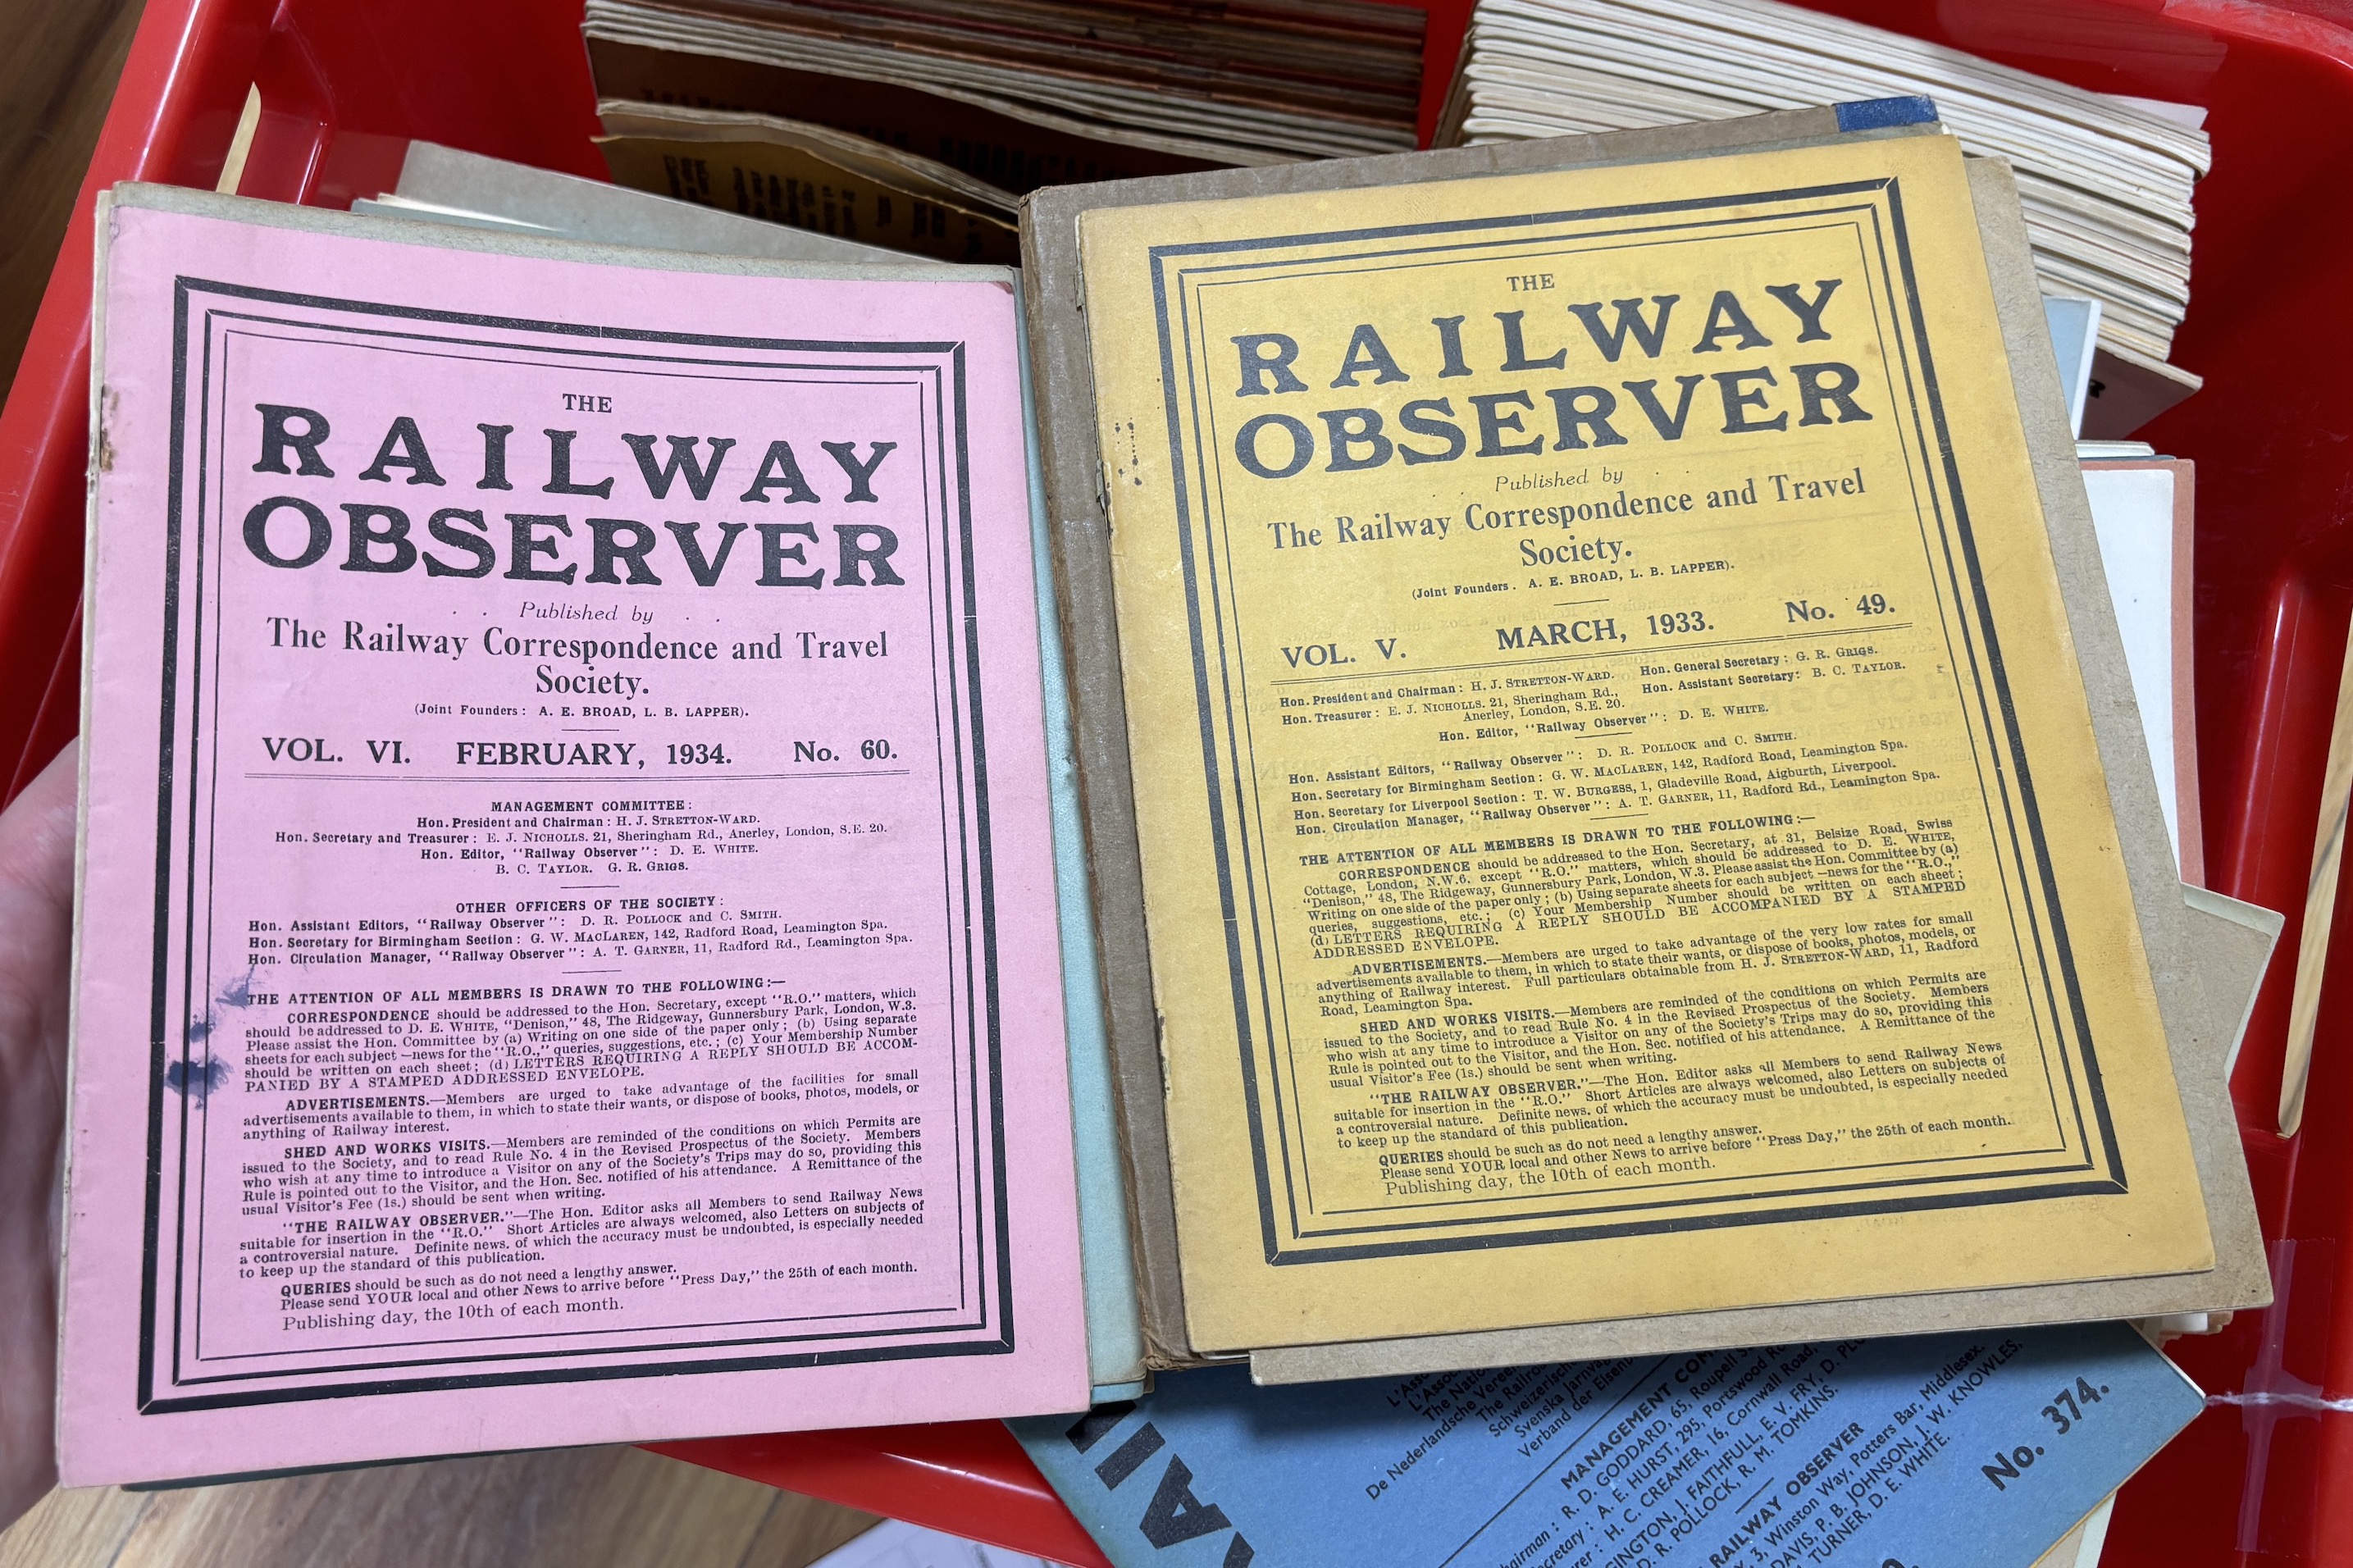 A collection of The Railway Observer magazines, mainly 1950s/60s issues